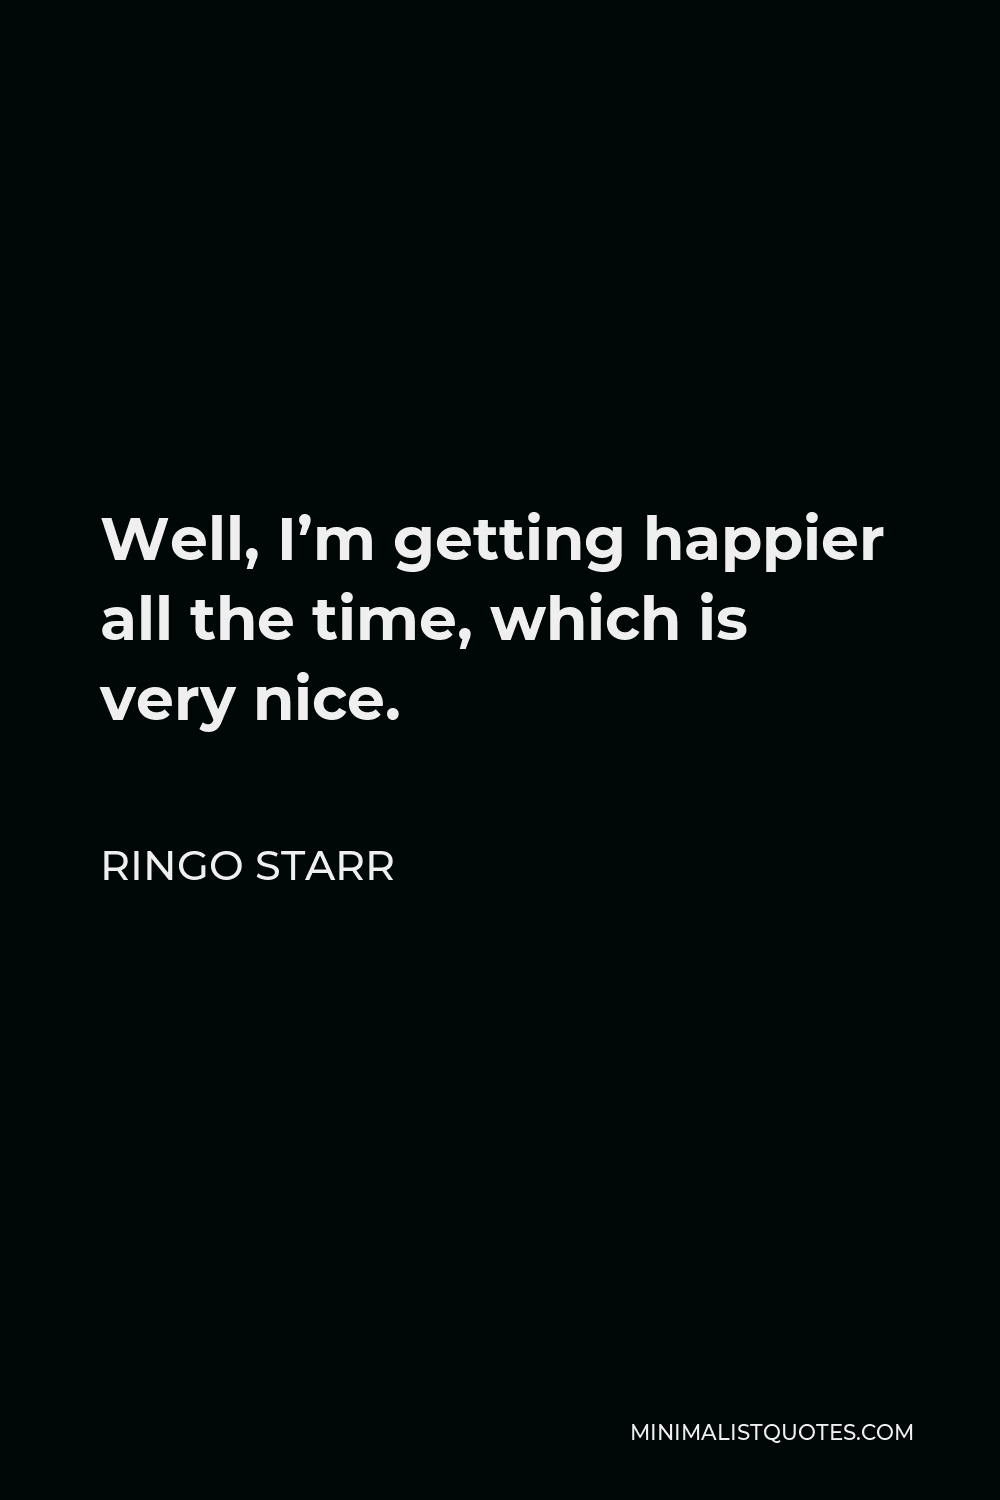 Ringo Starr Quote - Well, I’m getting happier all the time, which is very nice.